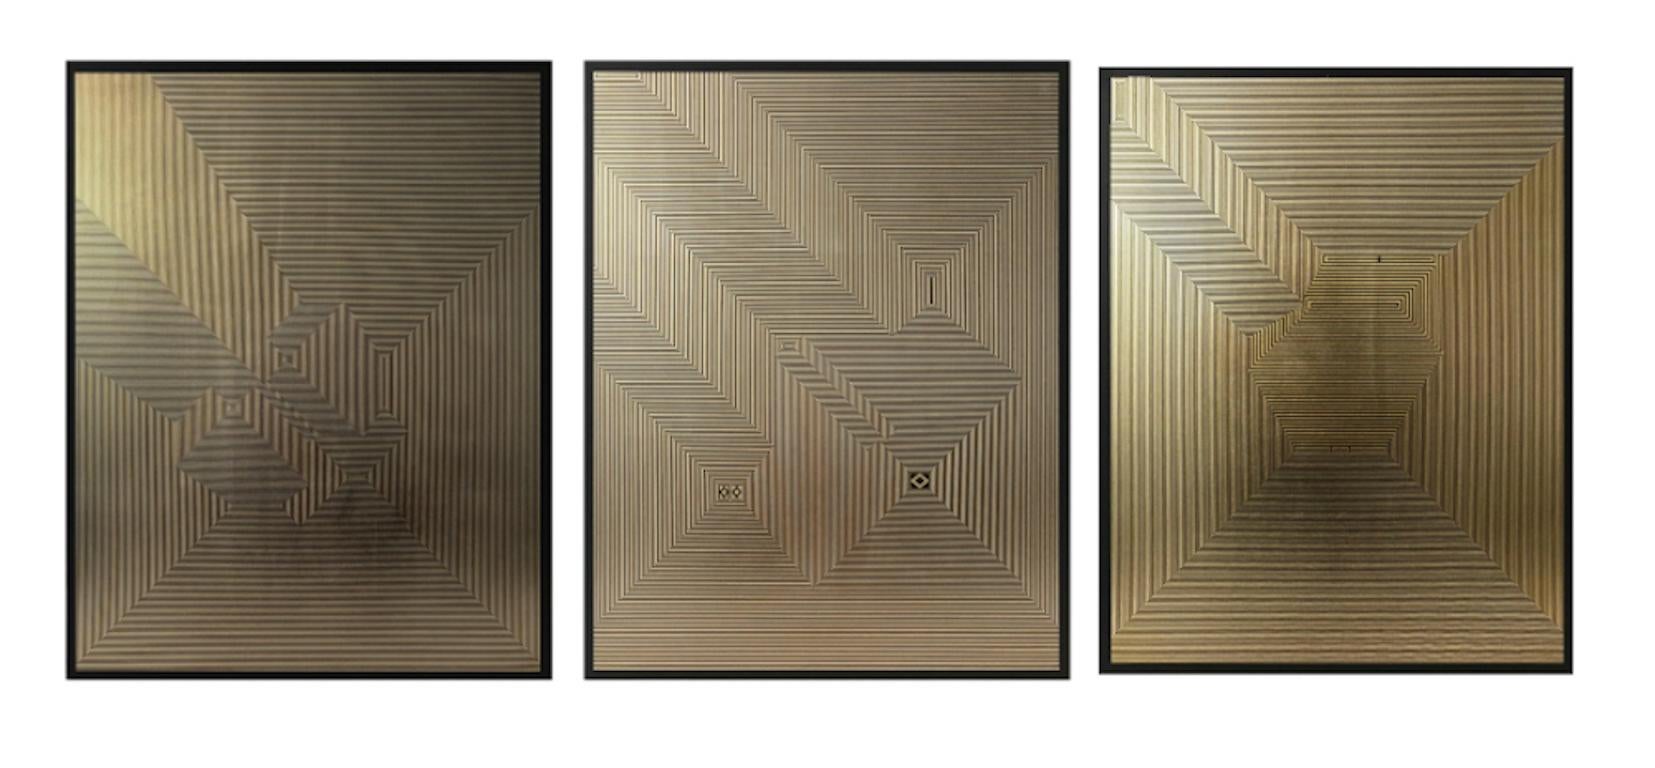 Untitled 5, Untitled 3 & Untitled 1 Triptych Gold Leaf on MDF - Mixed Media Art by Francisco Larios